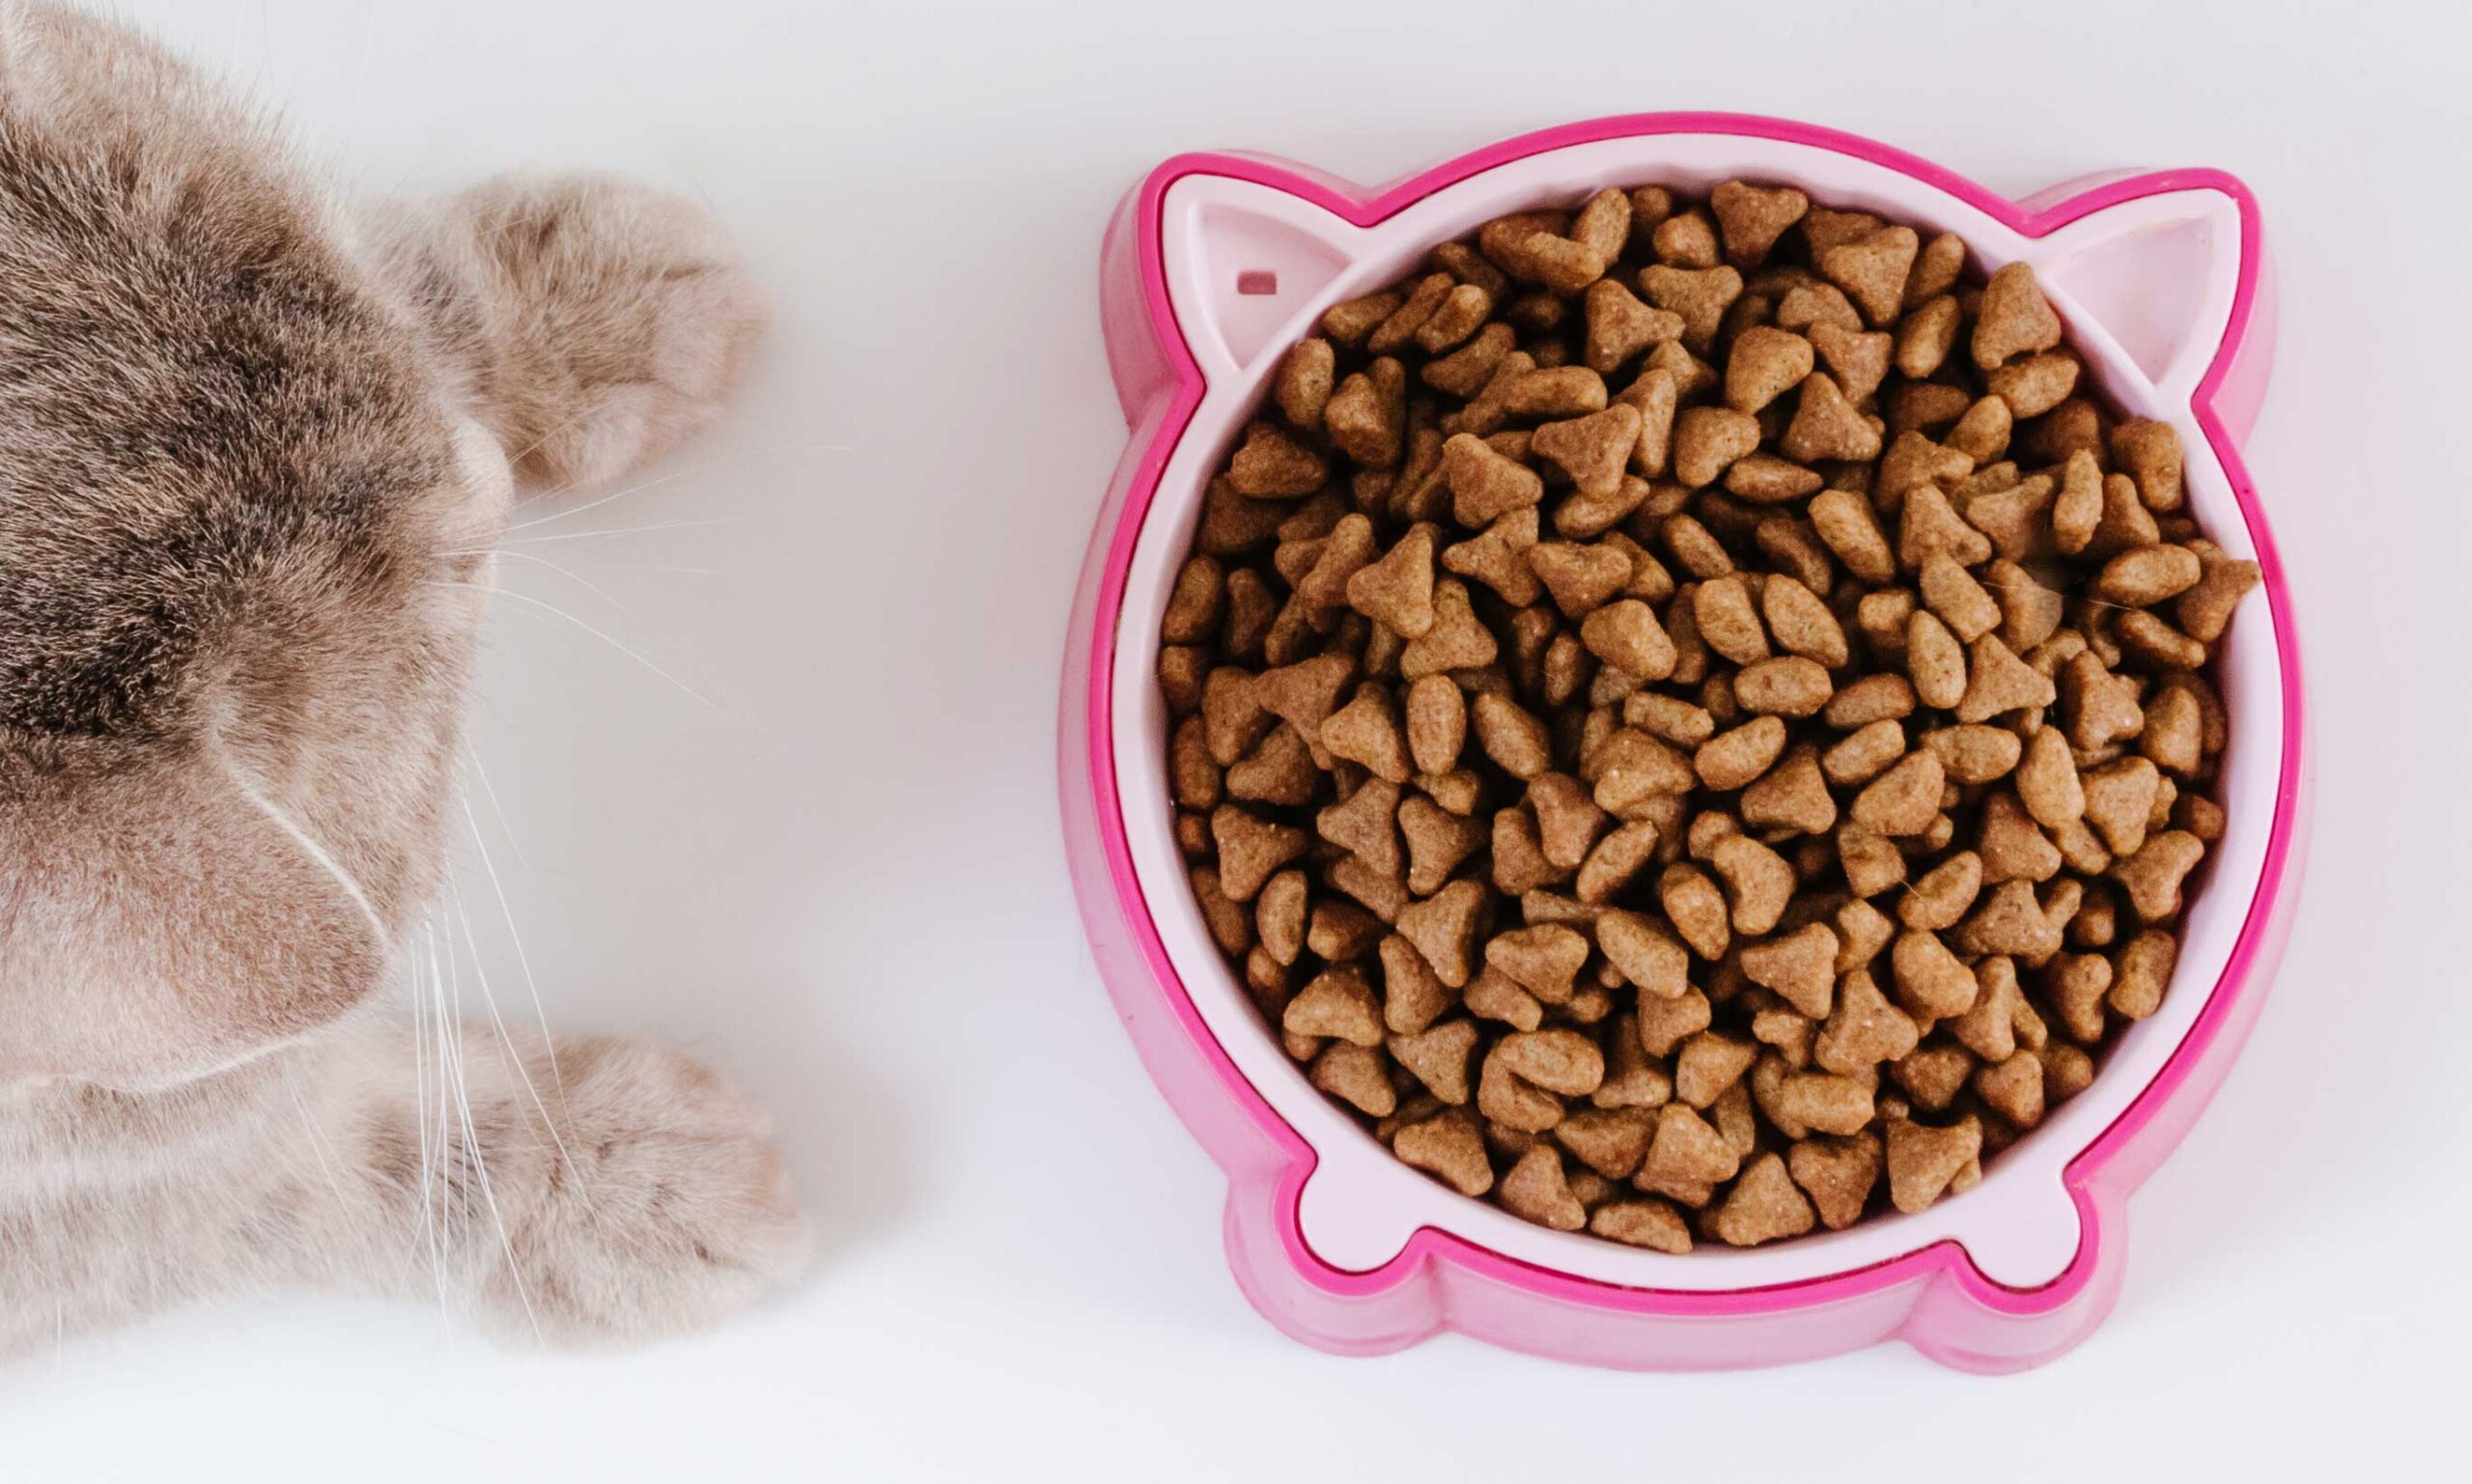 can cats eat dog food: cat food in pink bowl